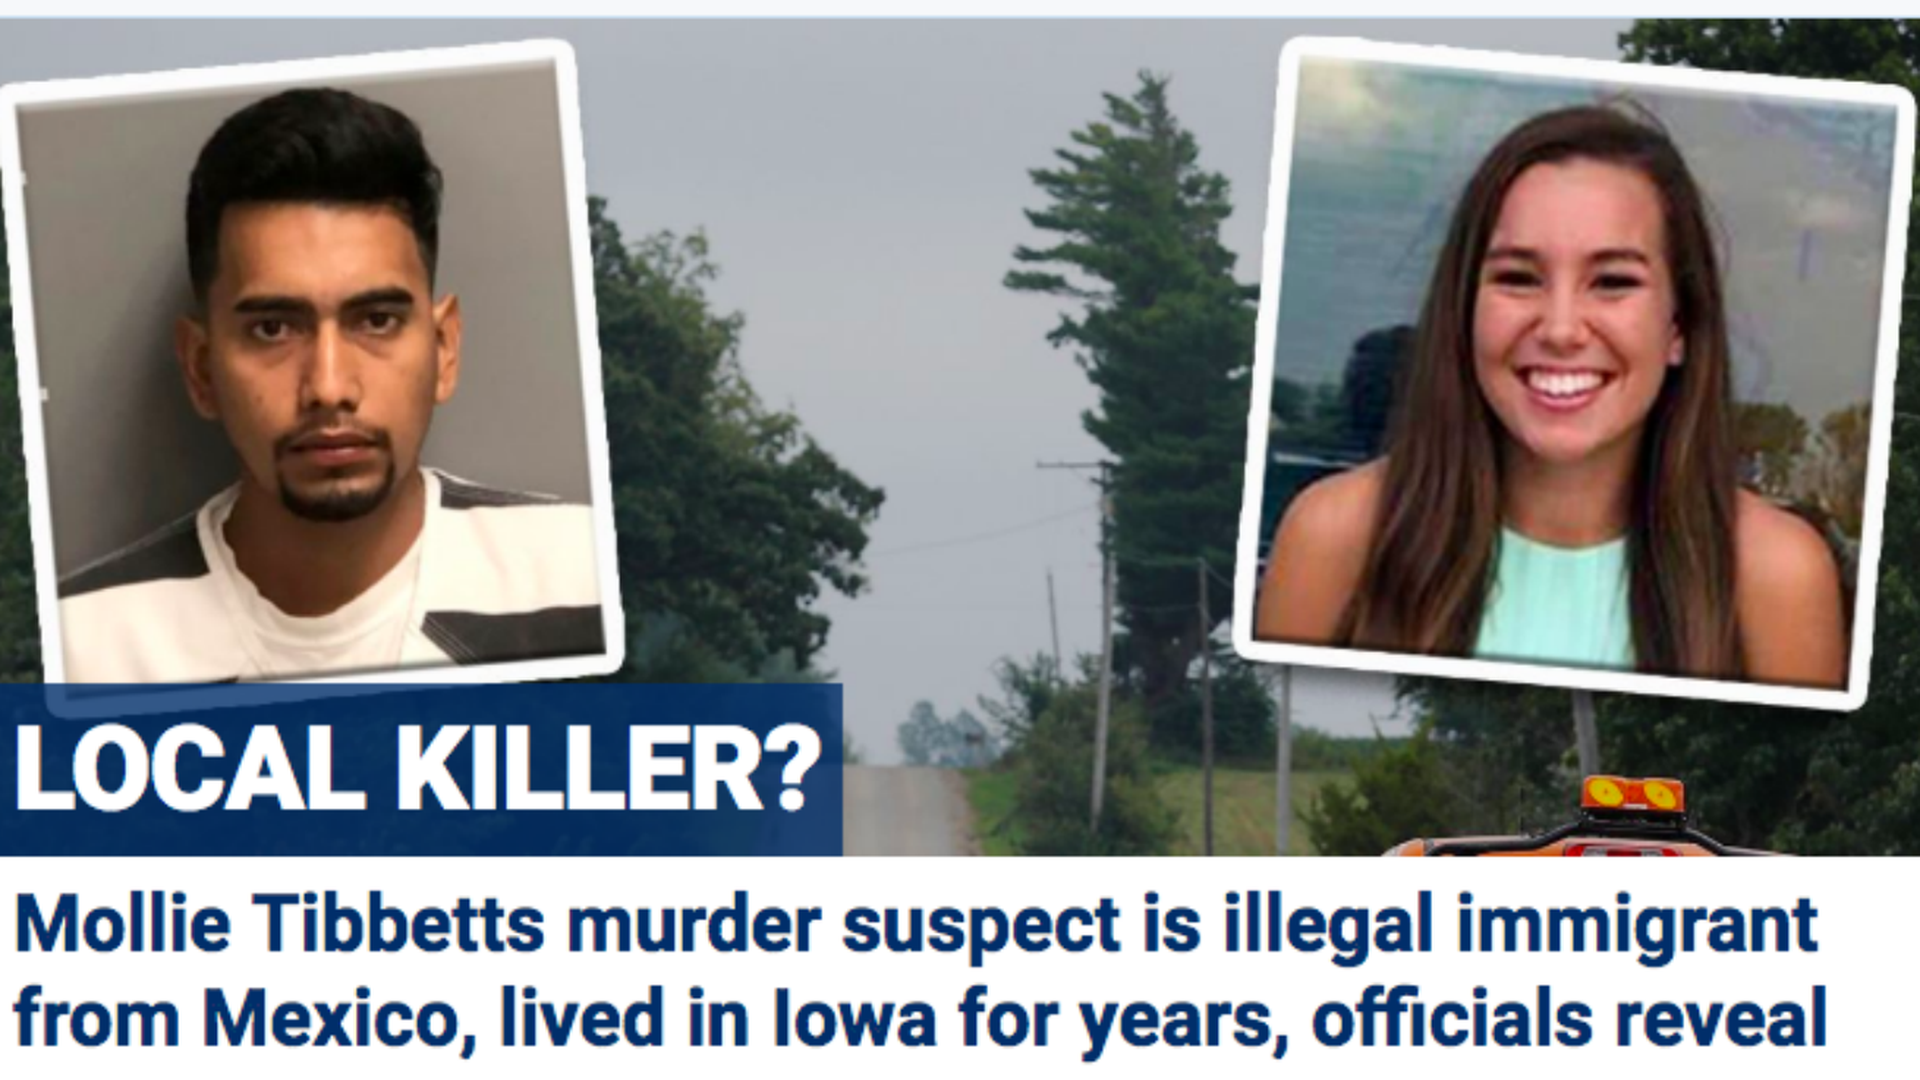 Mollie Tibbets and her alleged killer on Fox News